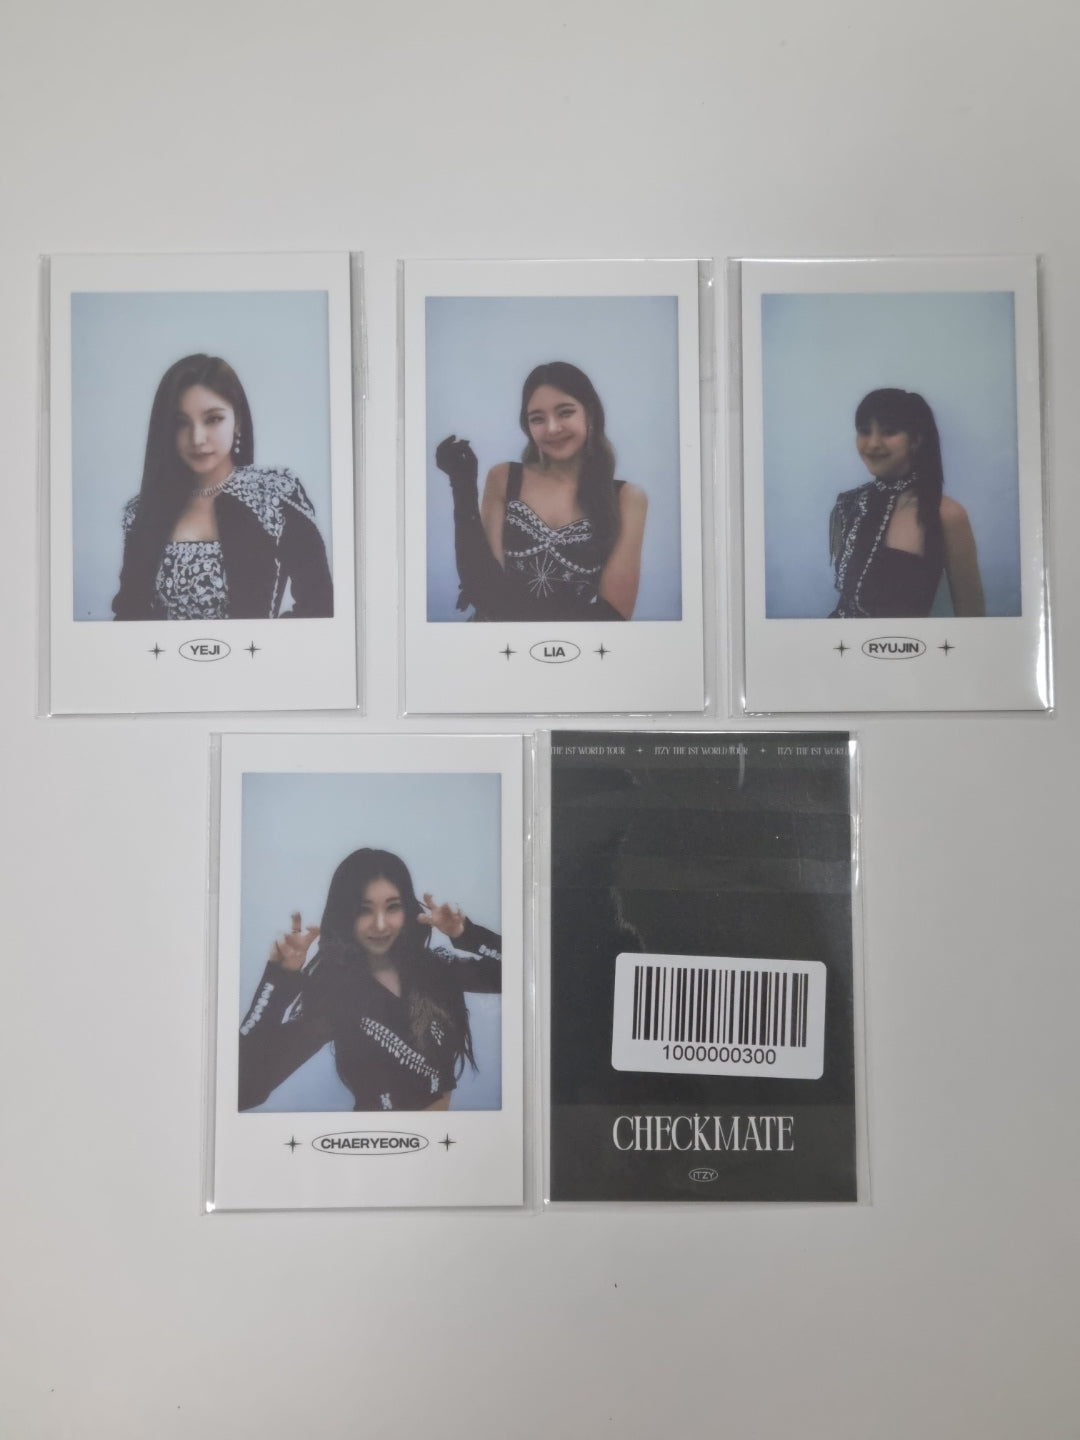 ITZY 'CHECKMATE' - The 1st World Tour Pre-order Benefit Polaroid Type Photocard